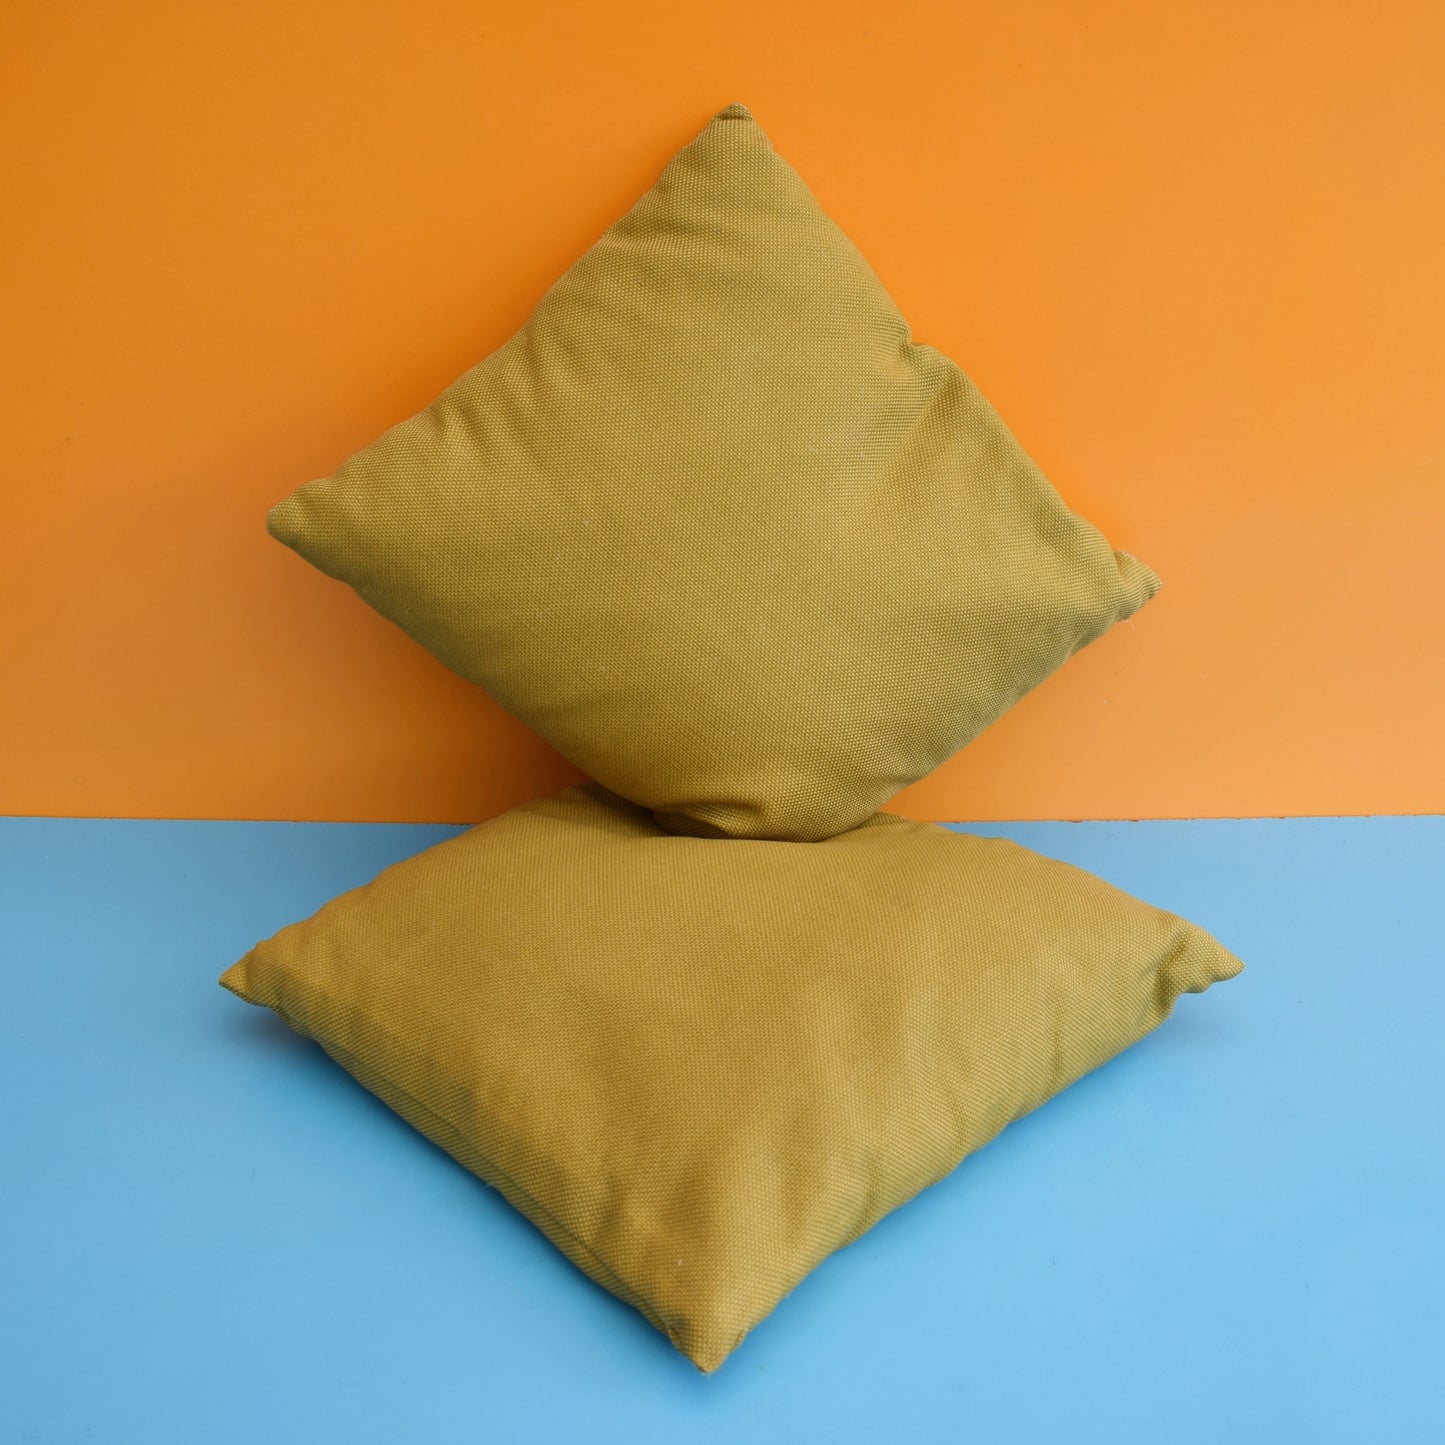 Vintage 1970s Cushions / Pads - Olive x2